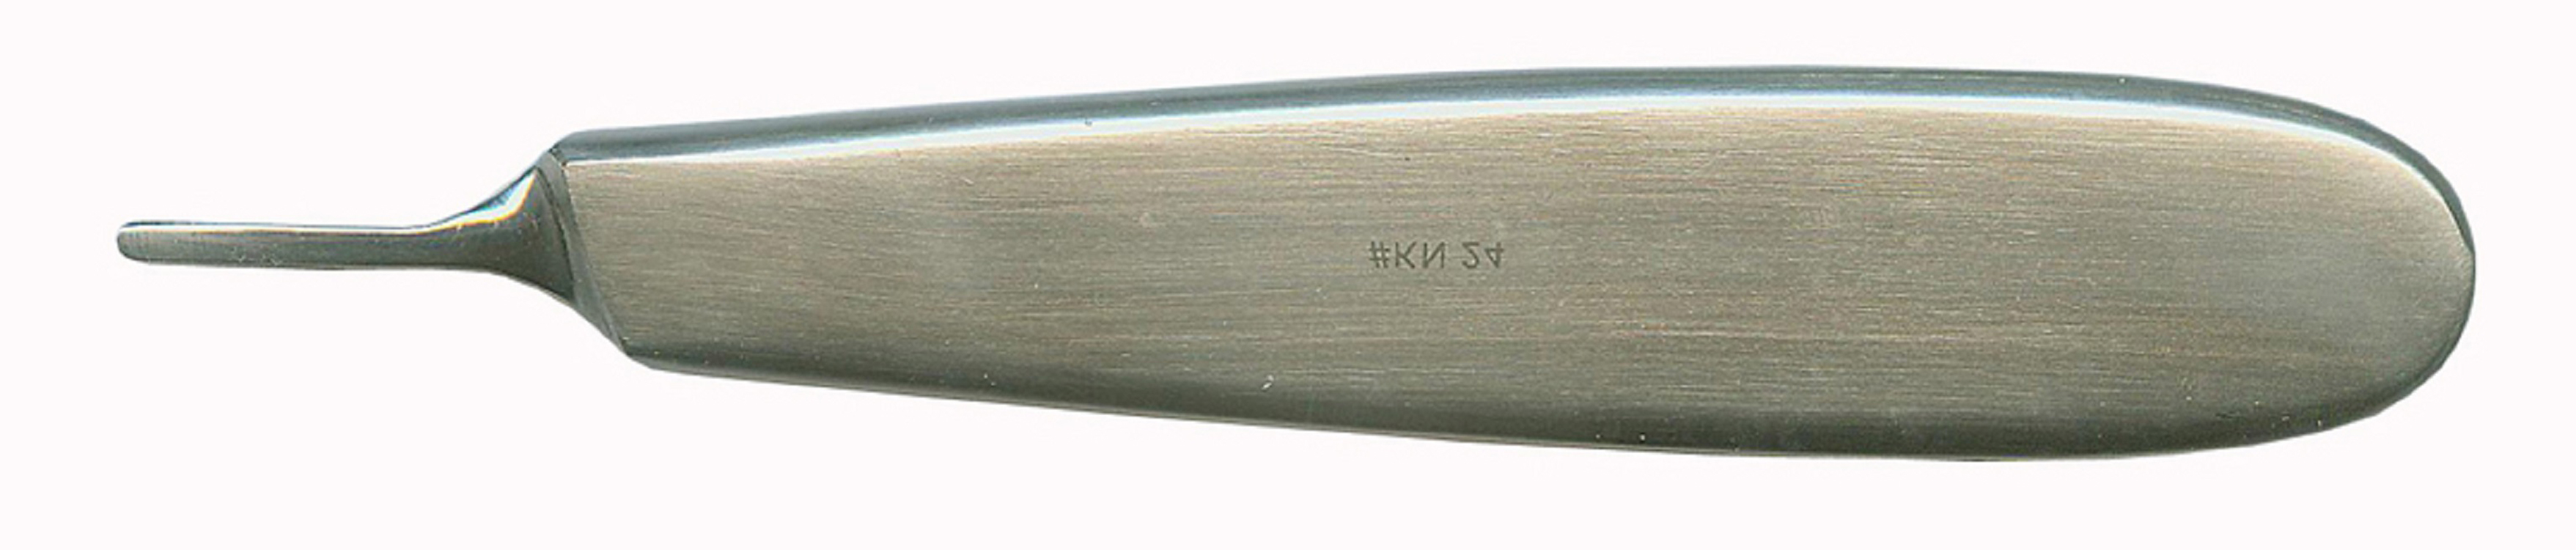 STAINLESS HOLLOW SCALPEL HANDLE FOR blades 20-26 - Click Image to Close